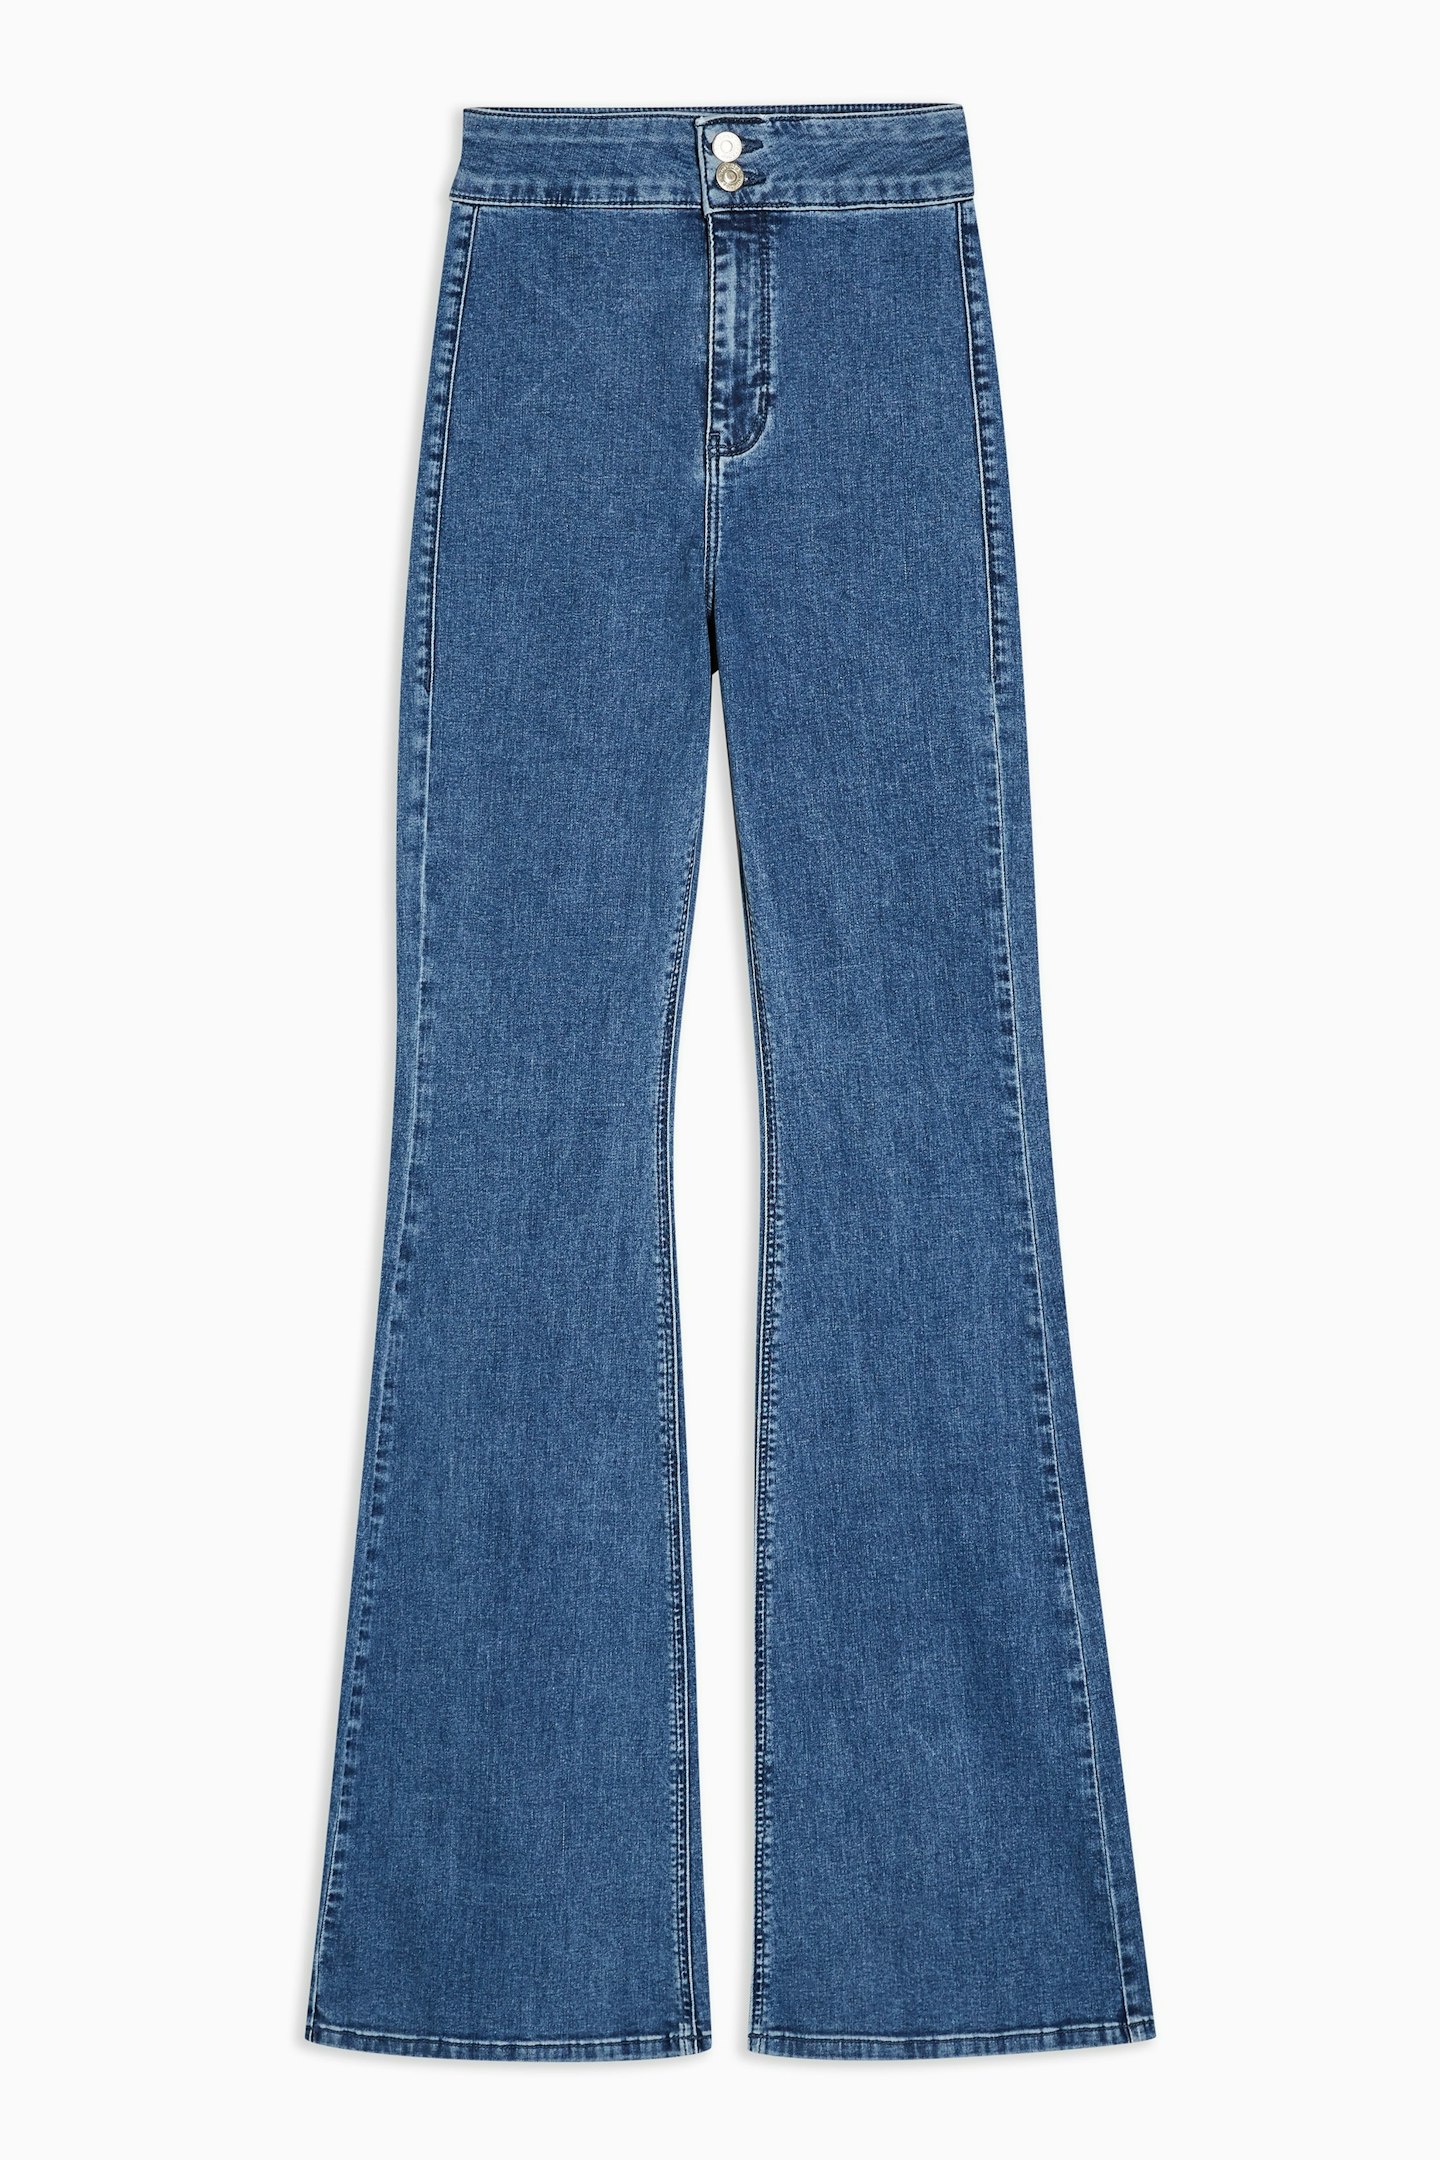 Topshop, Considered Flare Jeans, Was £29.99, Now £23.99